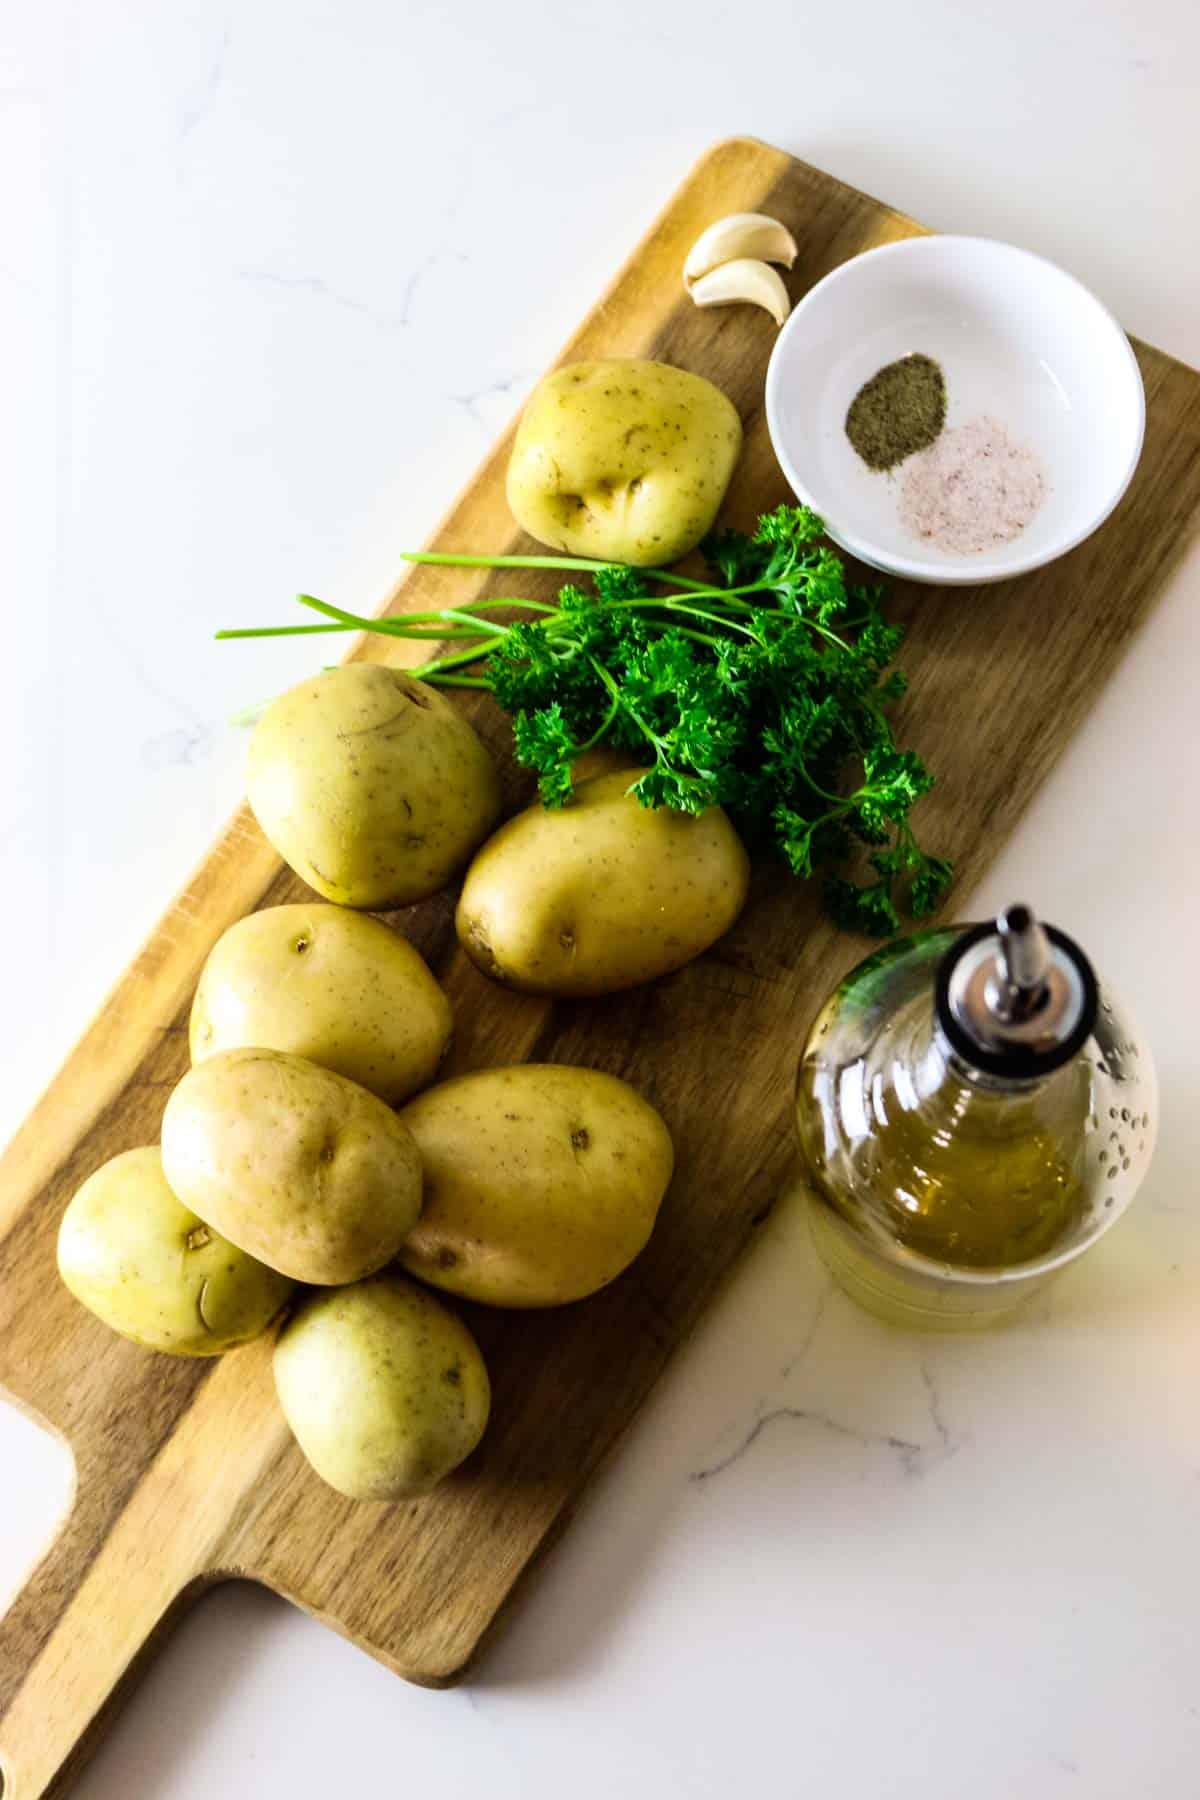 Yukon gold potatoes with seasonings and olive oil.